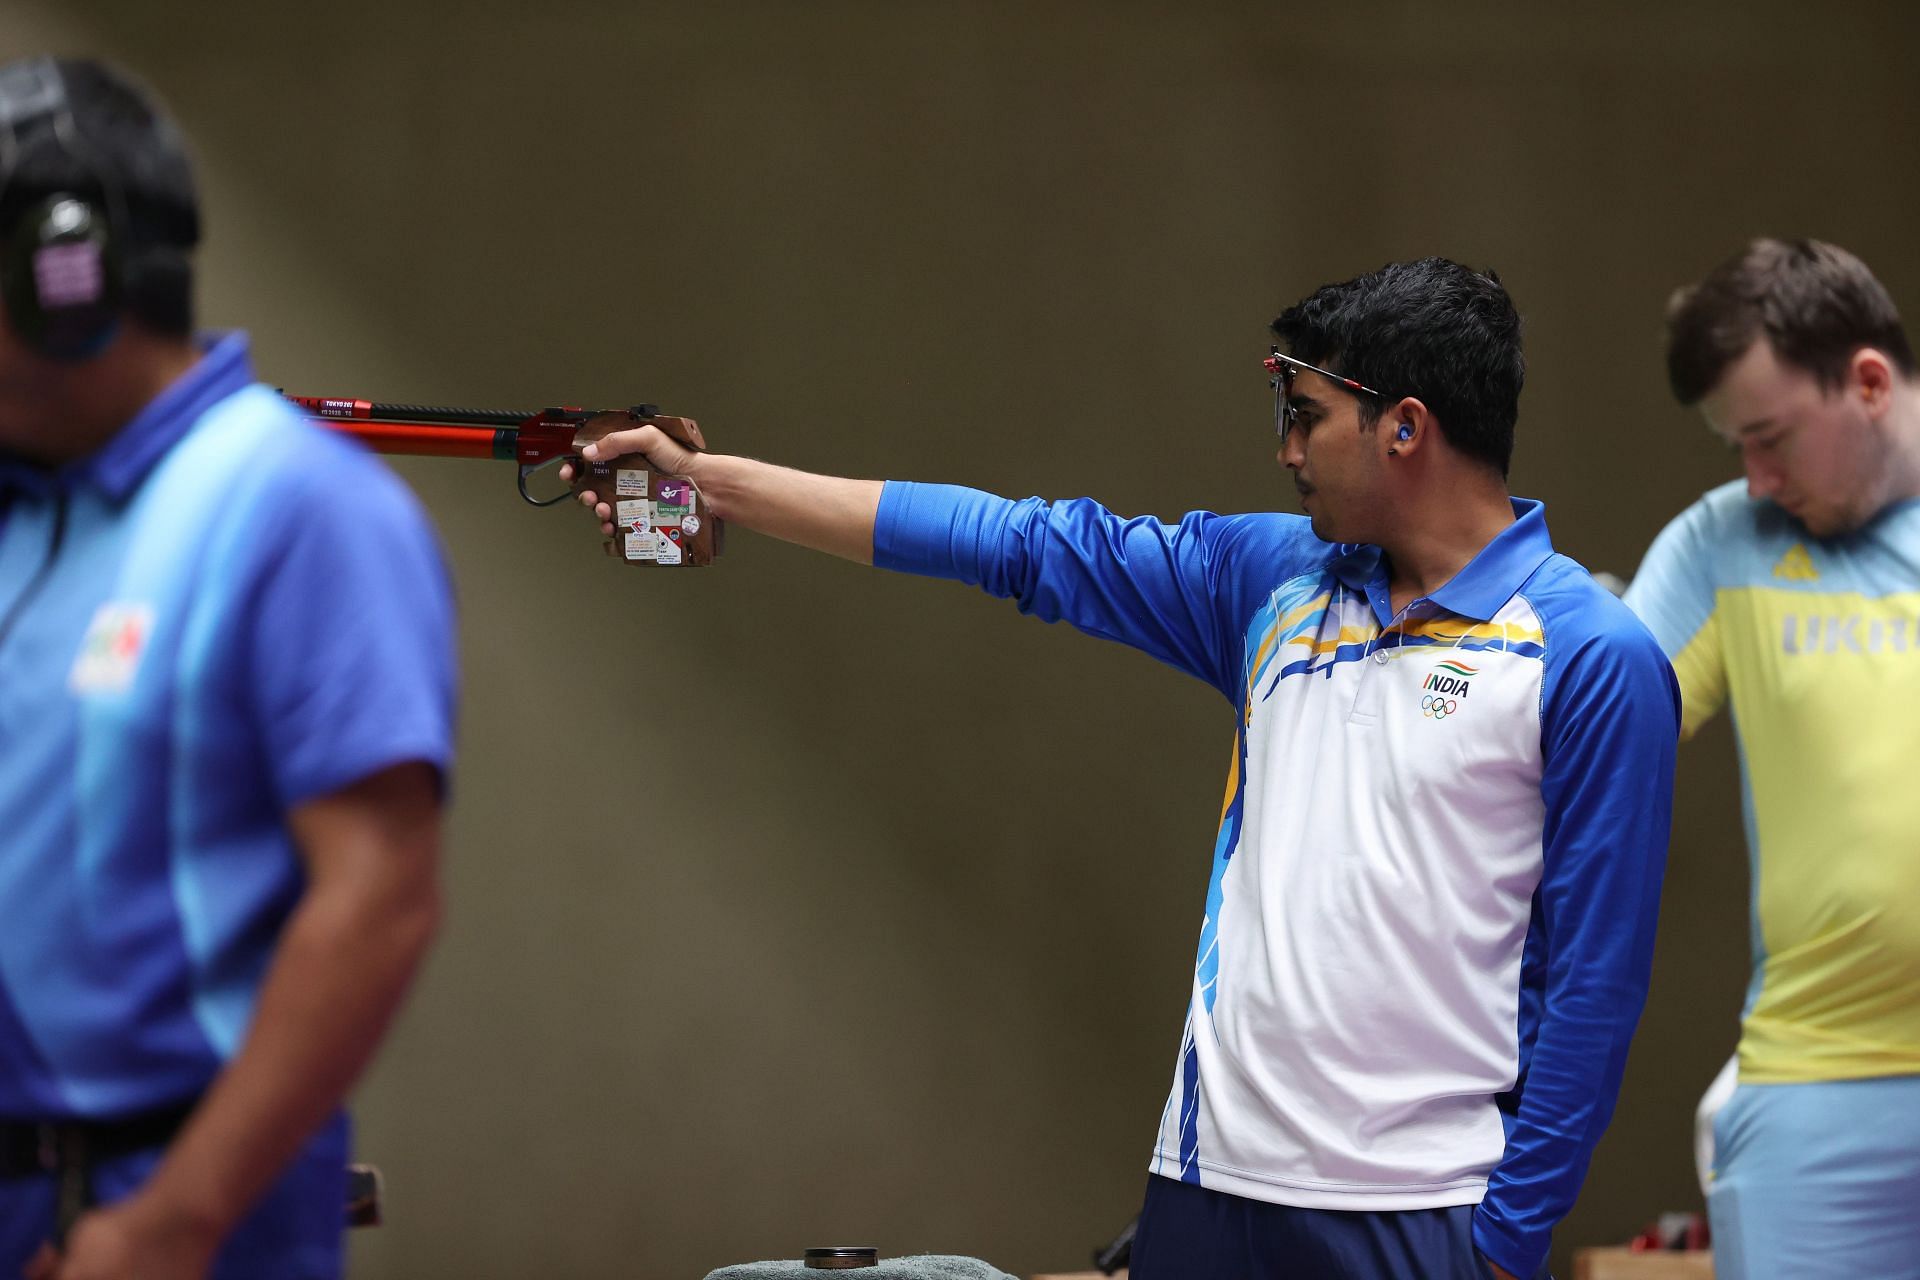 Action from the Tokyo Olympics shooting competition